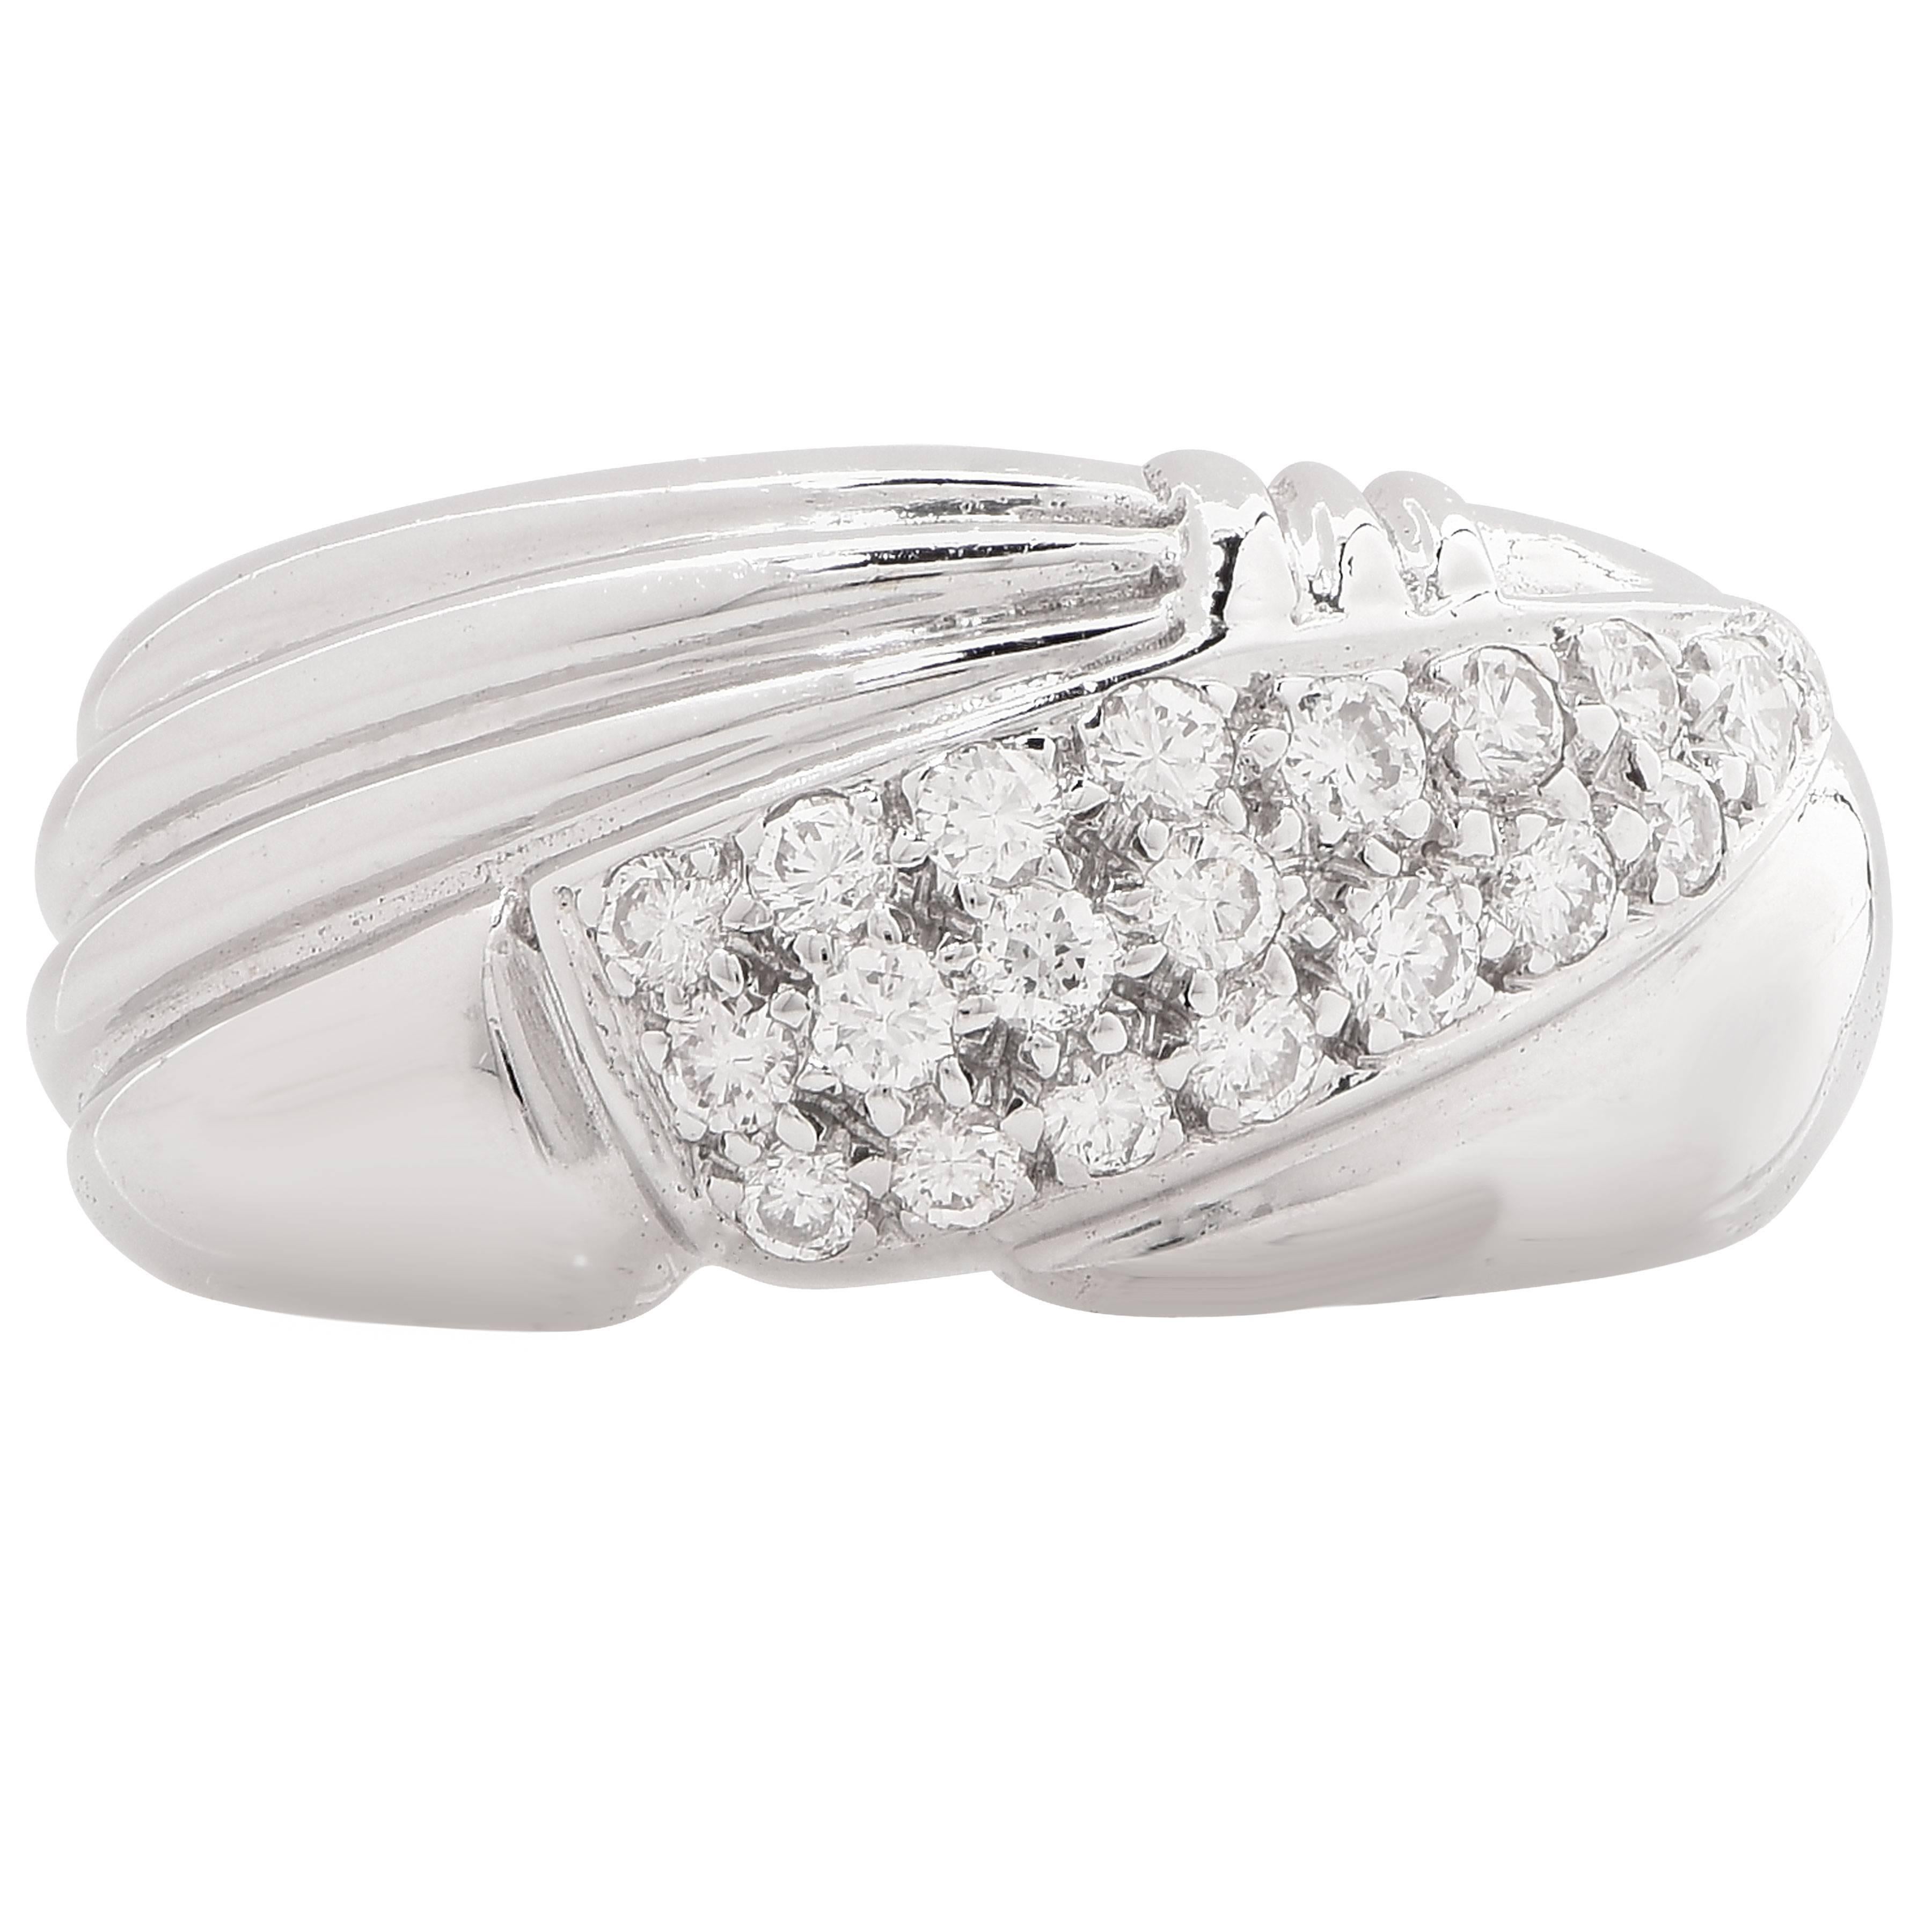 18 Karat White Gold Ring with Diamonds. This modern design ring features 20 round brilliant cut diamonds with an estimated total weight of .40 carat.

Metal: 18 Kt. White Gold (stamped and/or tested)
Metal Weight: 7.46 Grams
Ring Size: 6 3/4 (can be